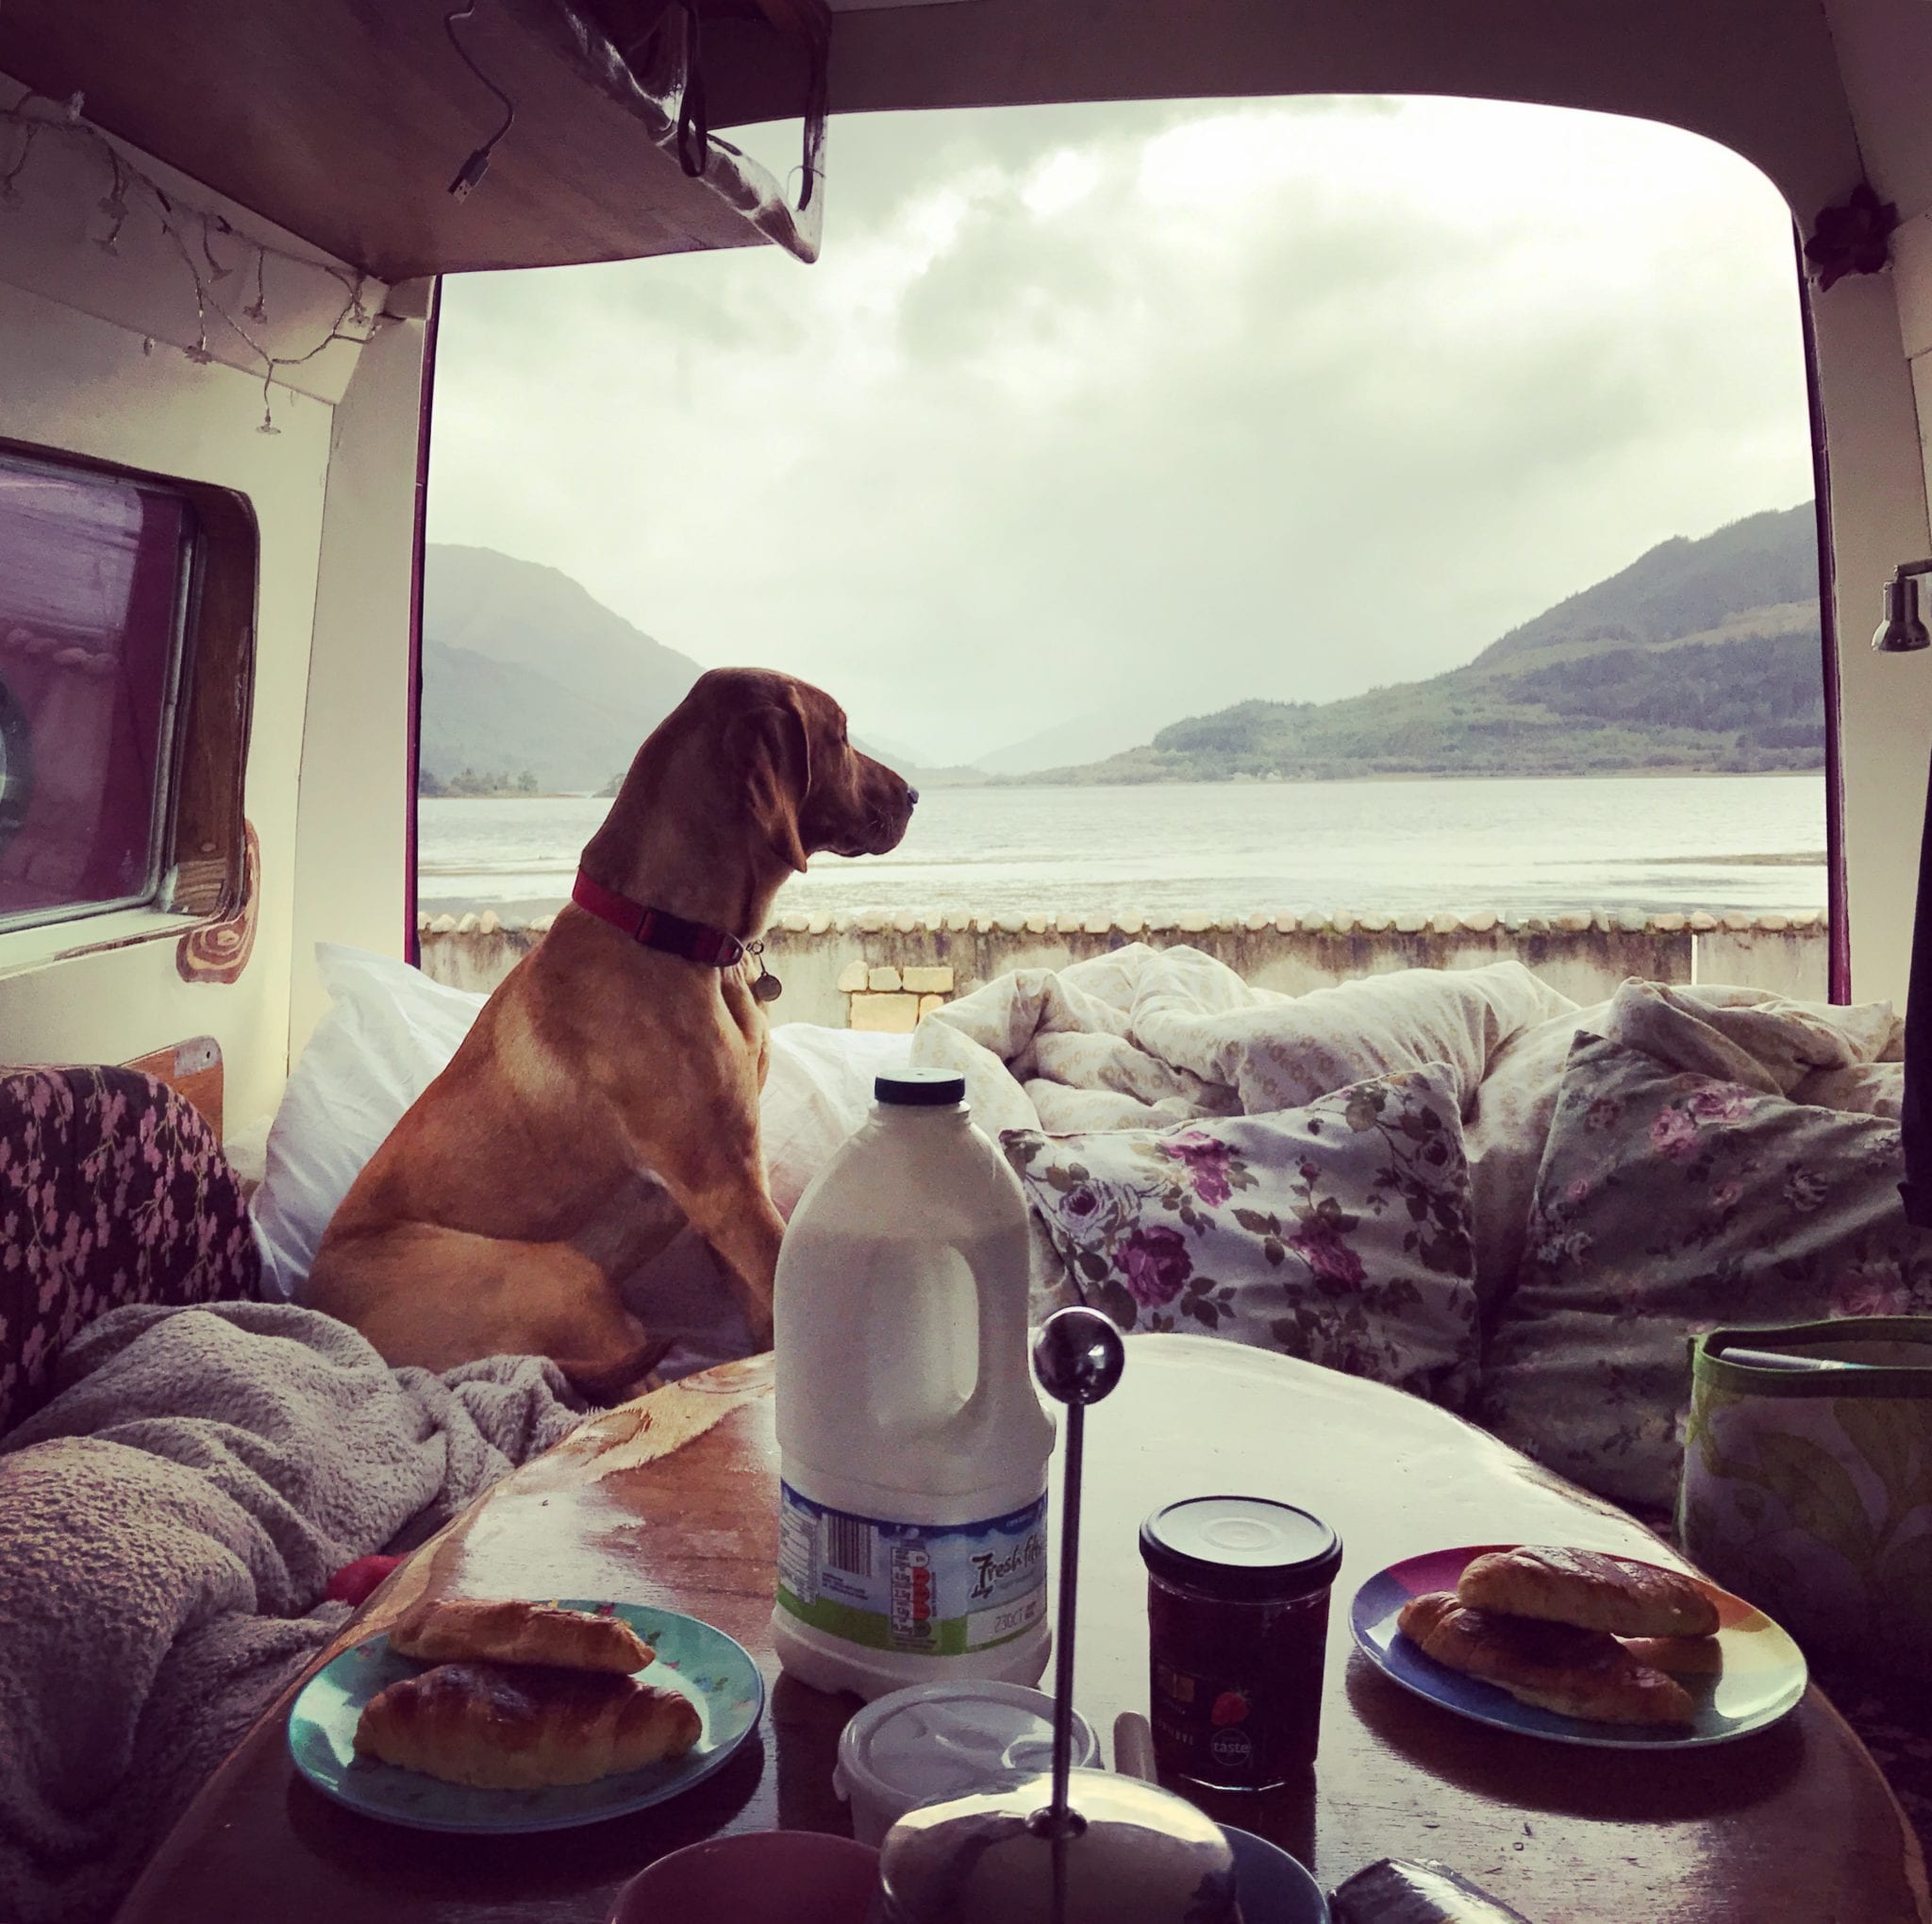 A dog sat on a bed campervan bed looking out onto a lake with breakfast on the table